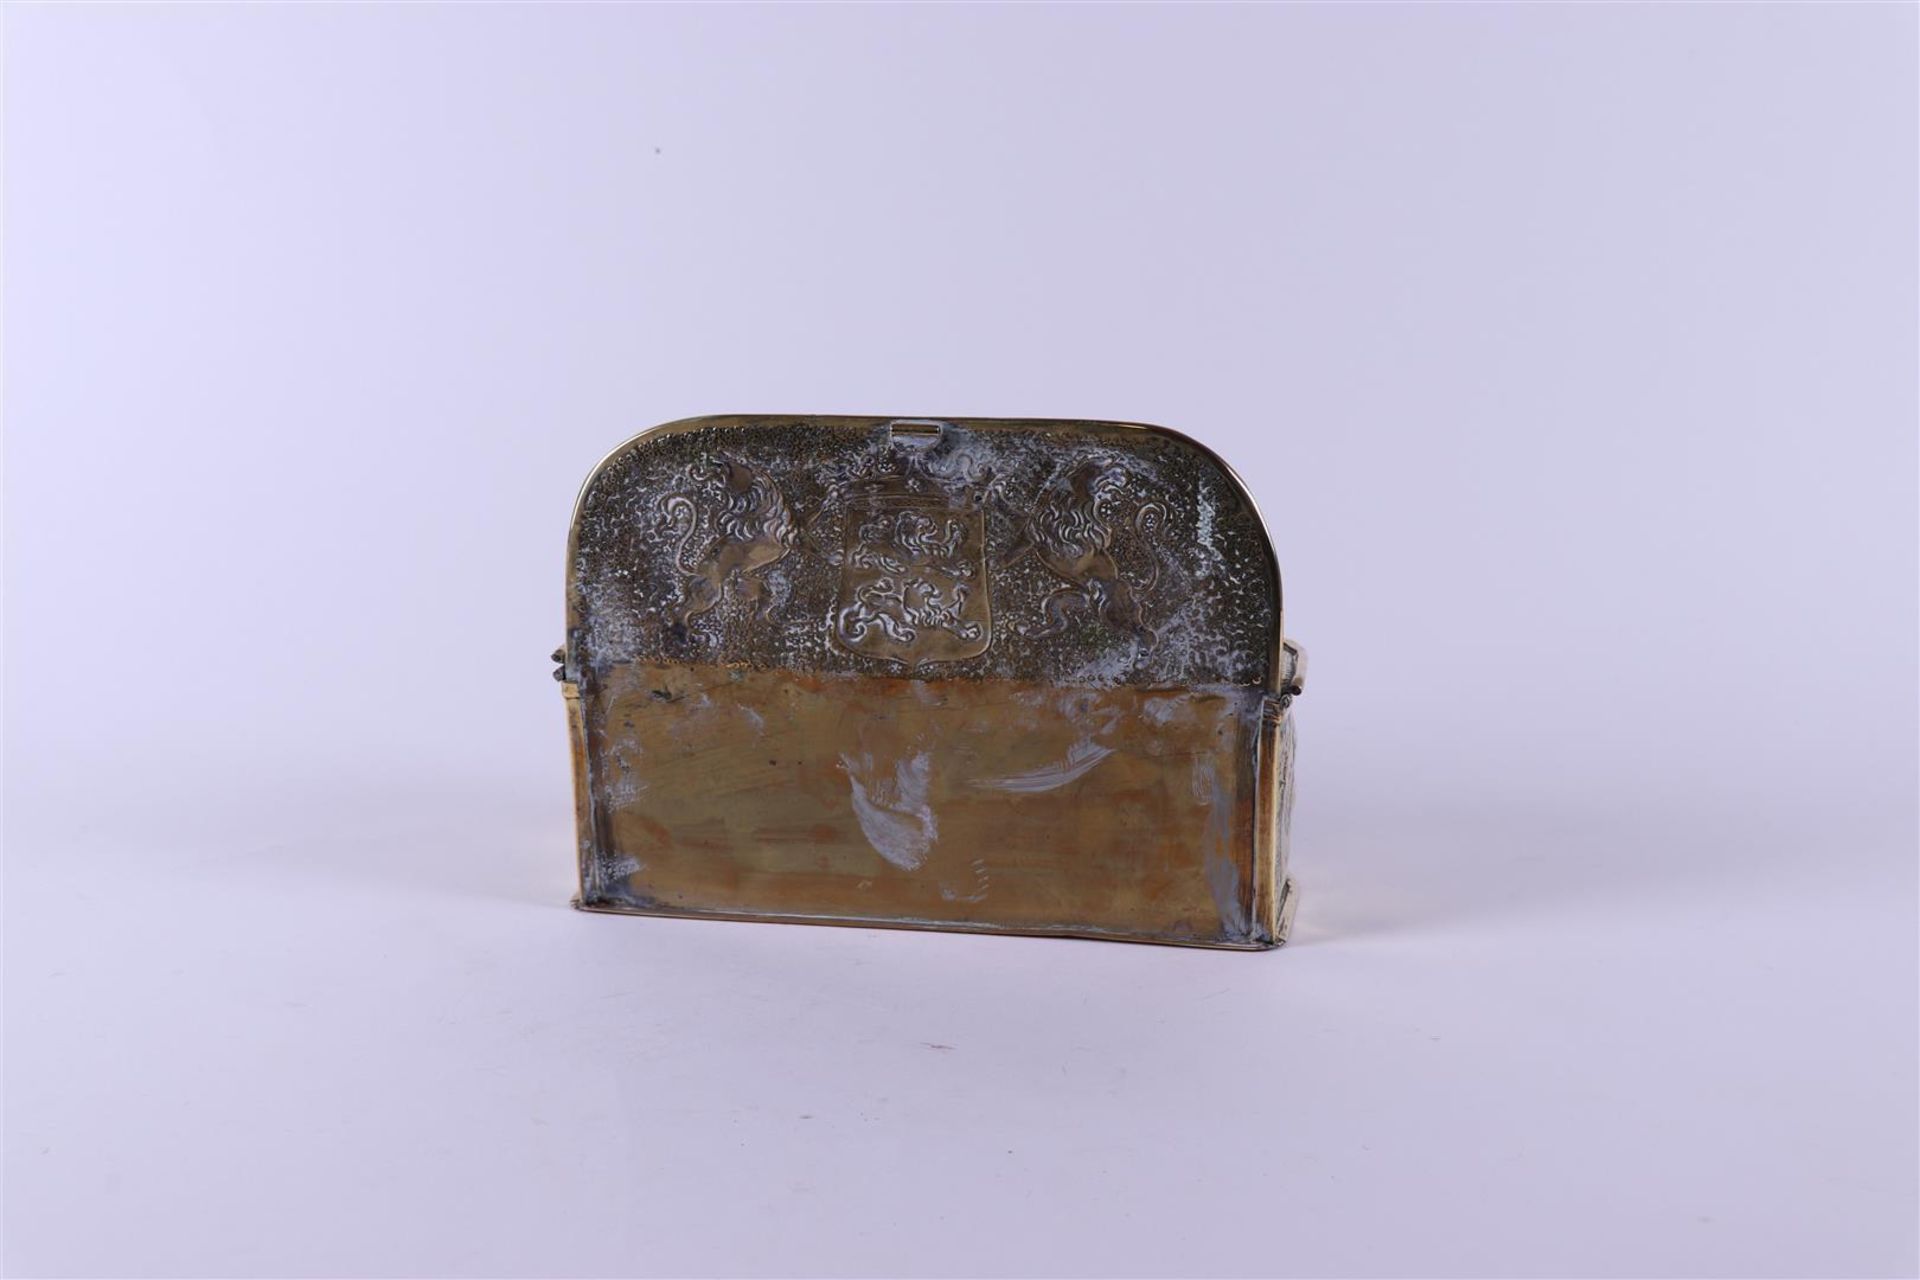 A copper tinder box with lid, Friesland, 19th century.
20 x 26 x 10 cm. - Image 3 of 3